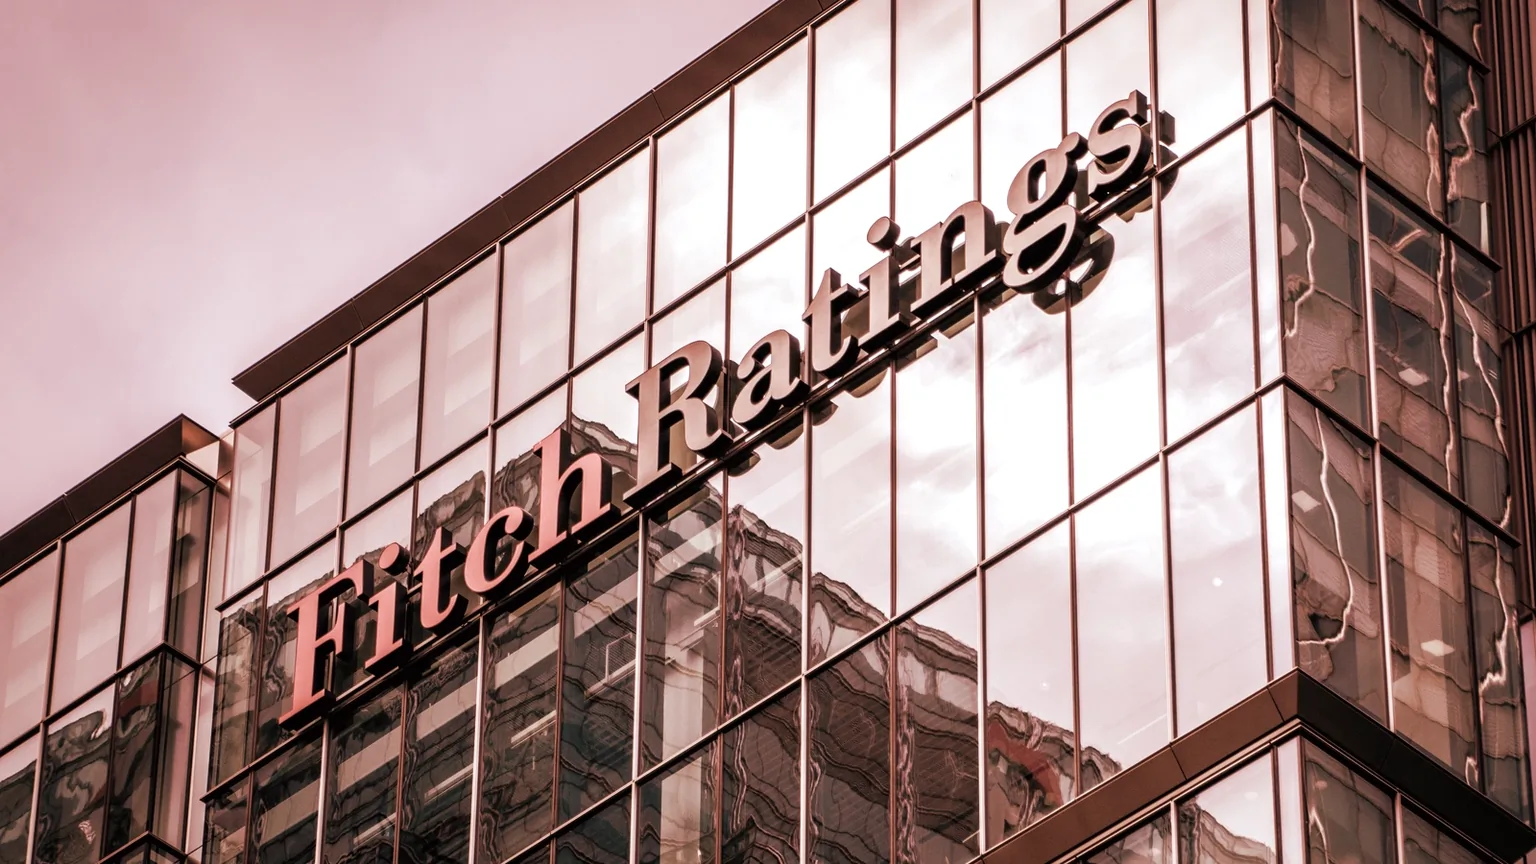 Fitch Ratings. Image: Shutterstock